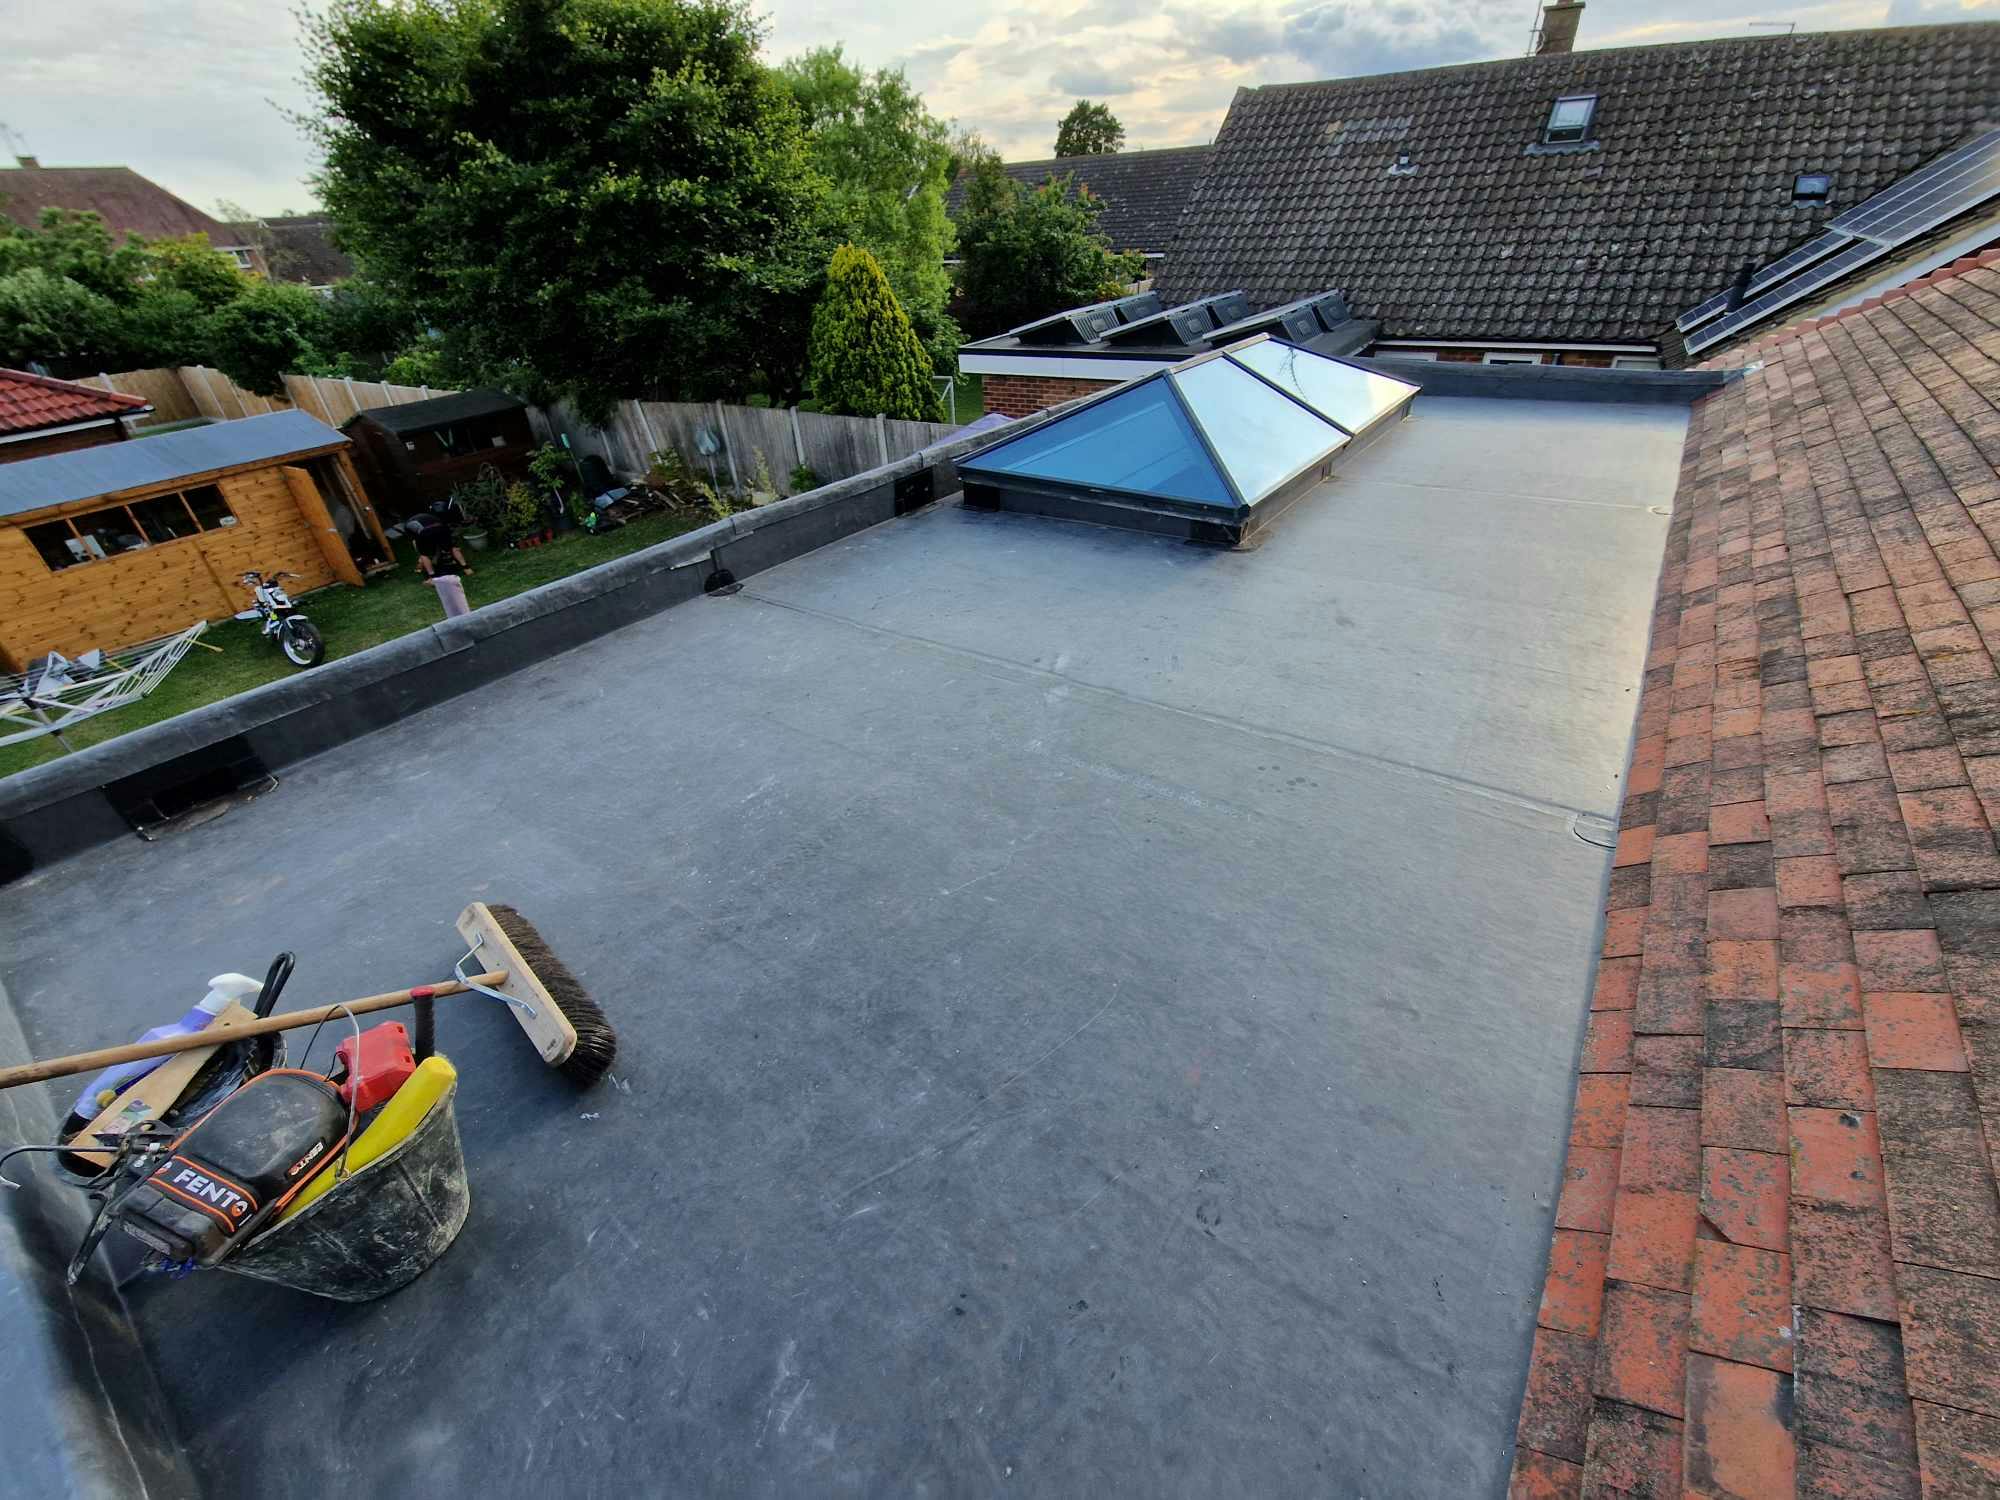 Flat Roofing (EPDM Rubber Roofing)